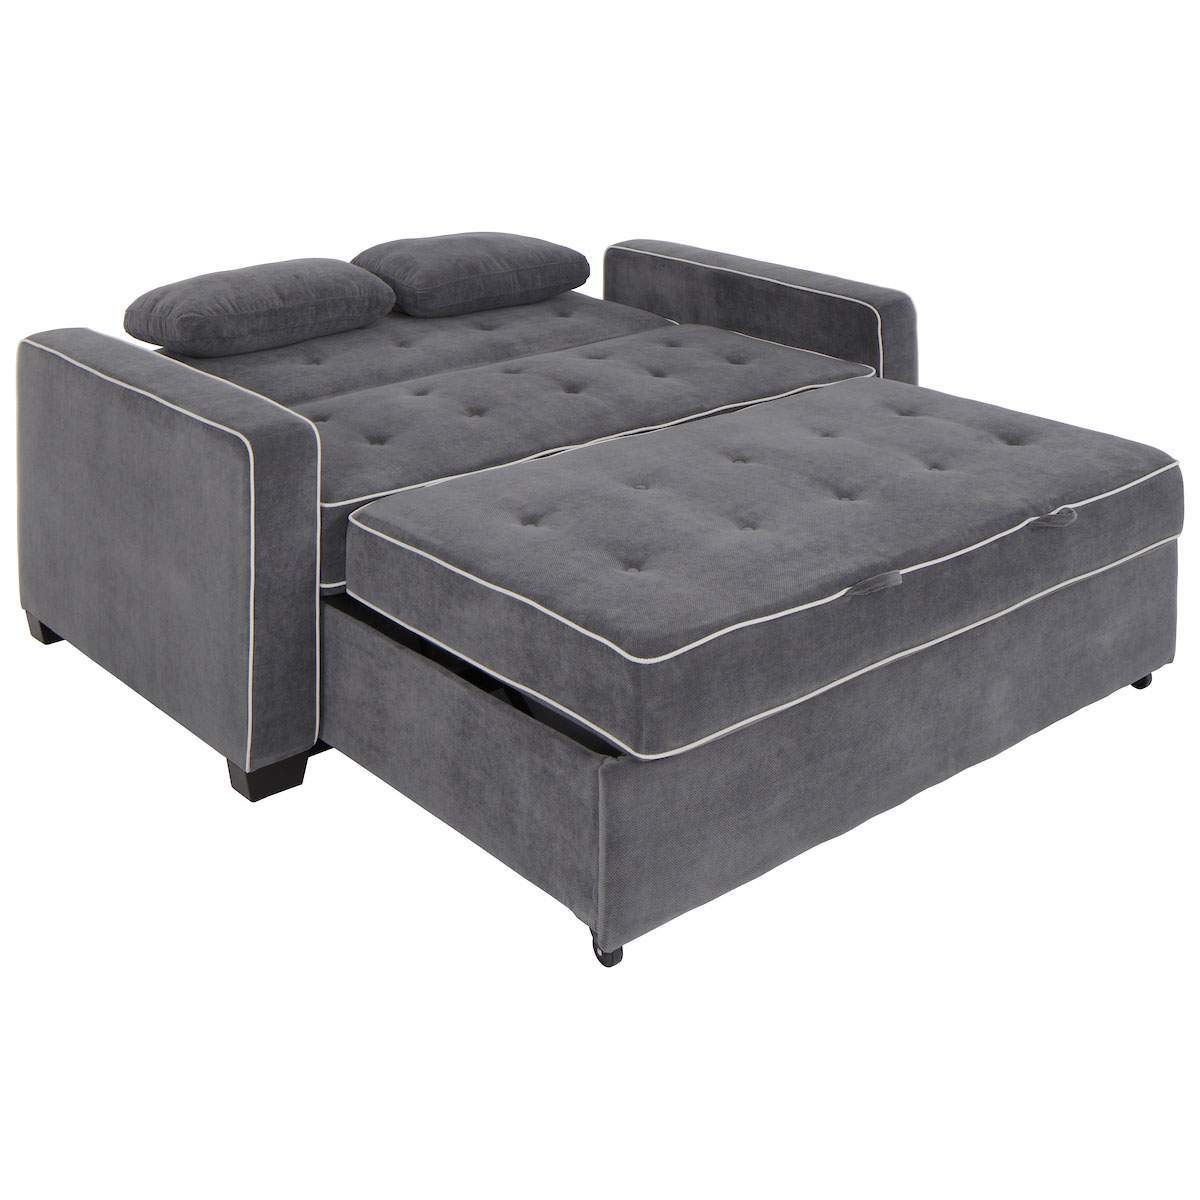 Supreme Pull Out Sofa Bed Fold Away Couch In 2 In 1 Gray Pull Out Sofa Beds (View 10 of 20)